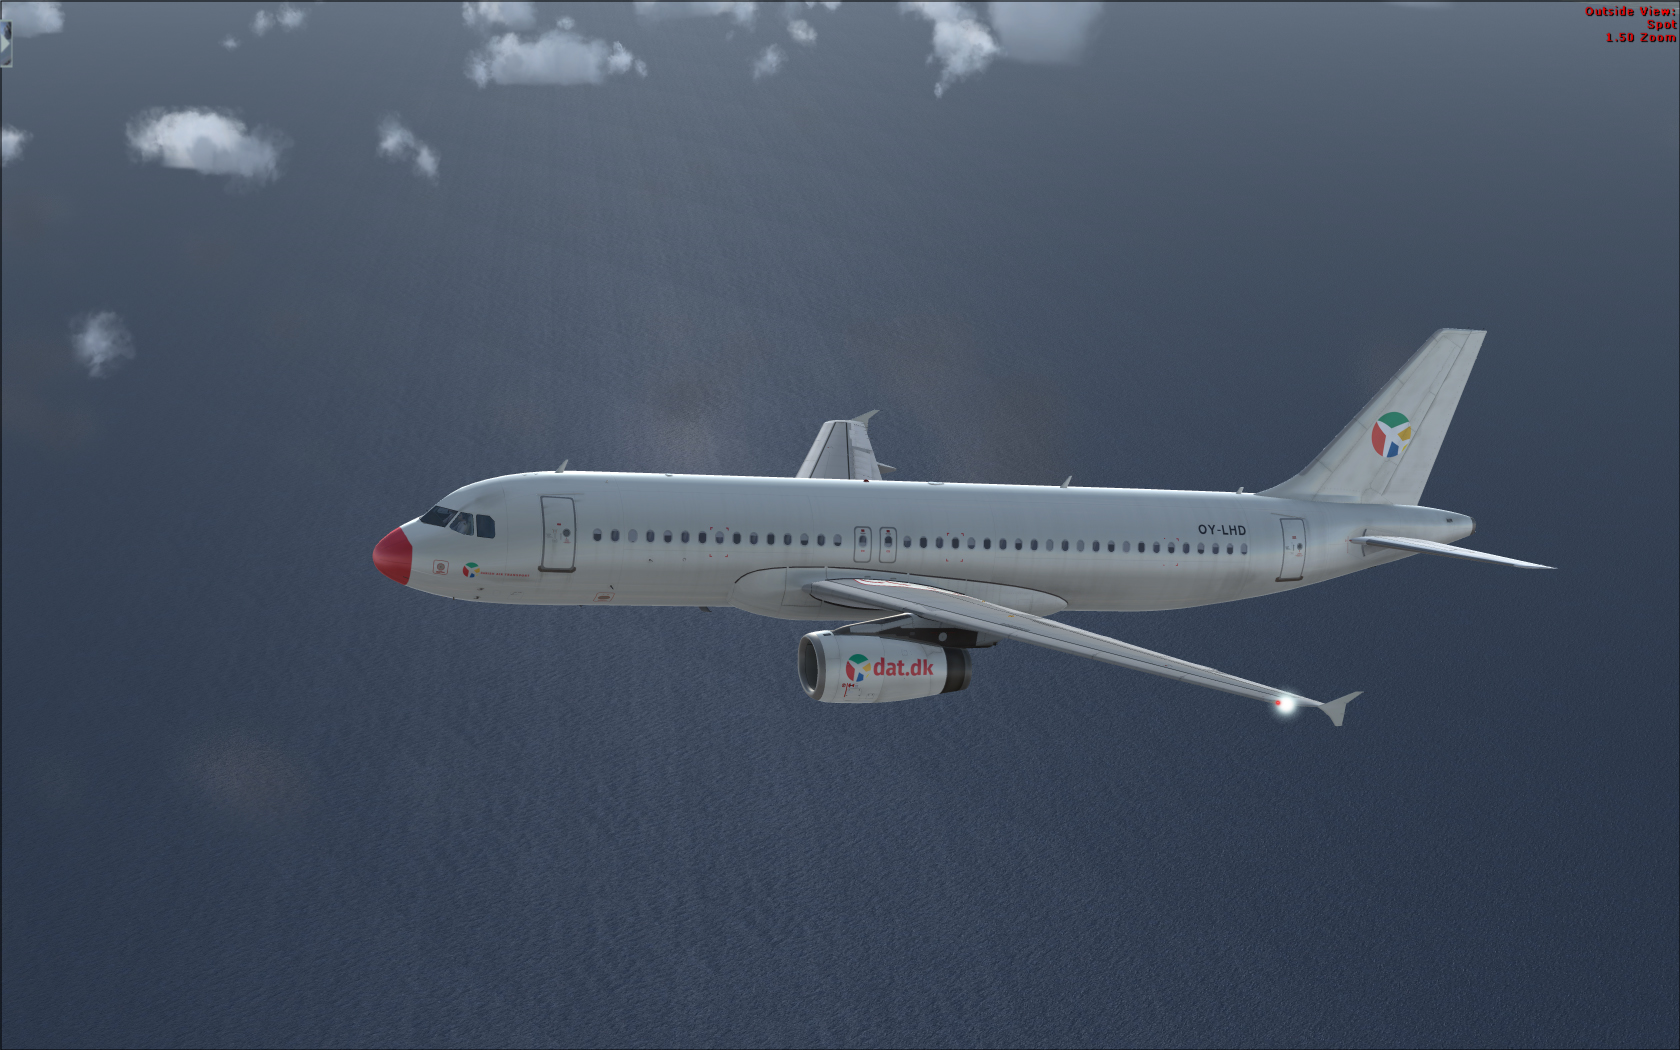 More information about "Danish Air Transport Airbus A320-231 IAE "update""